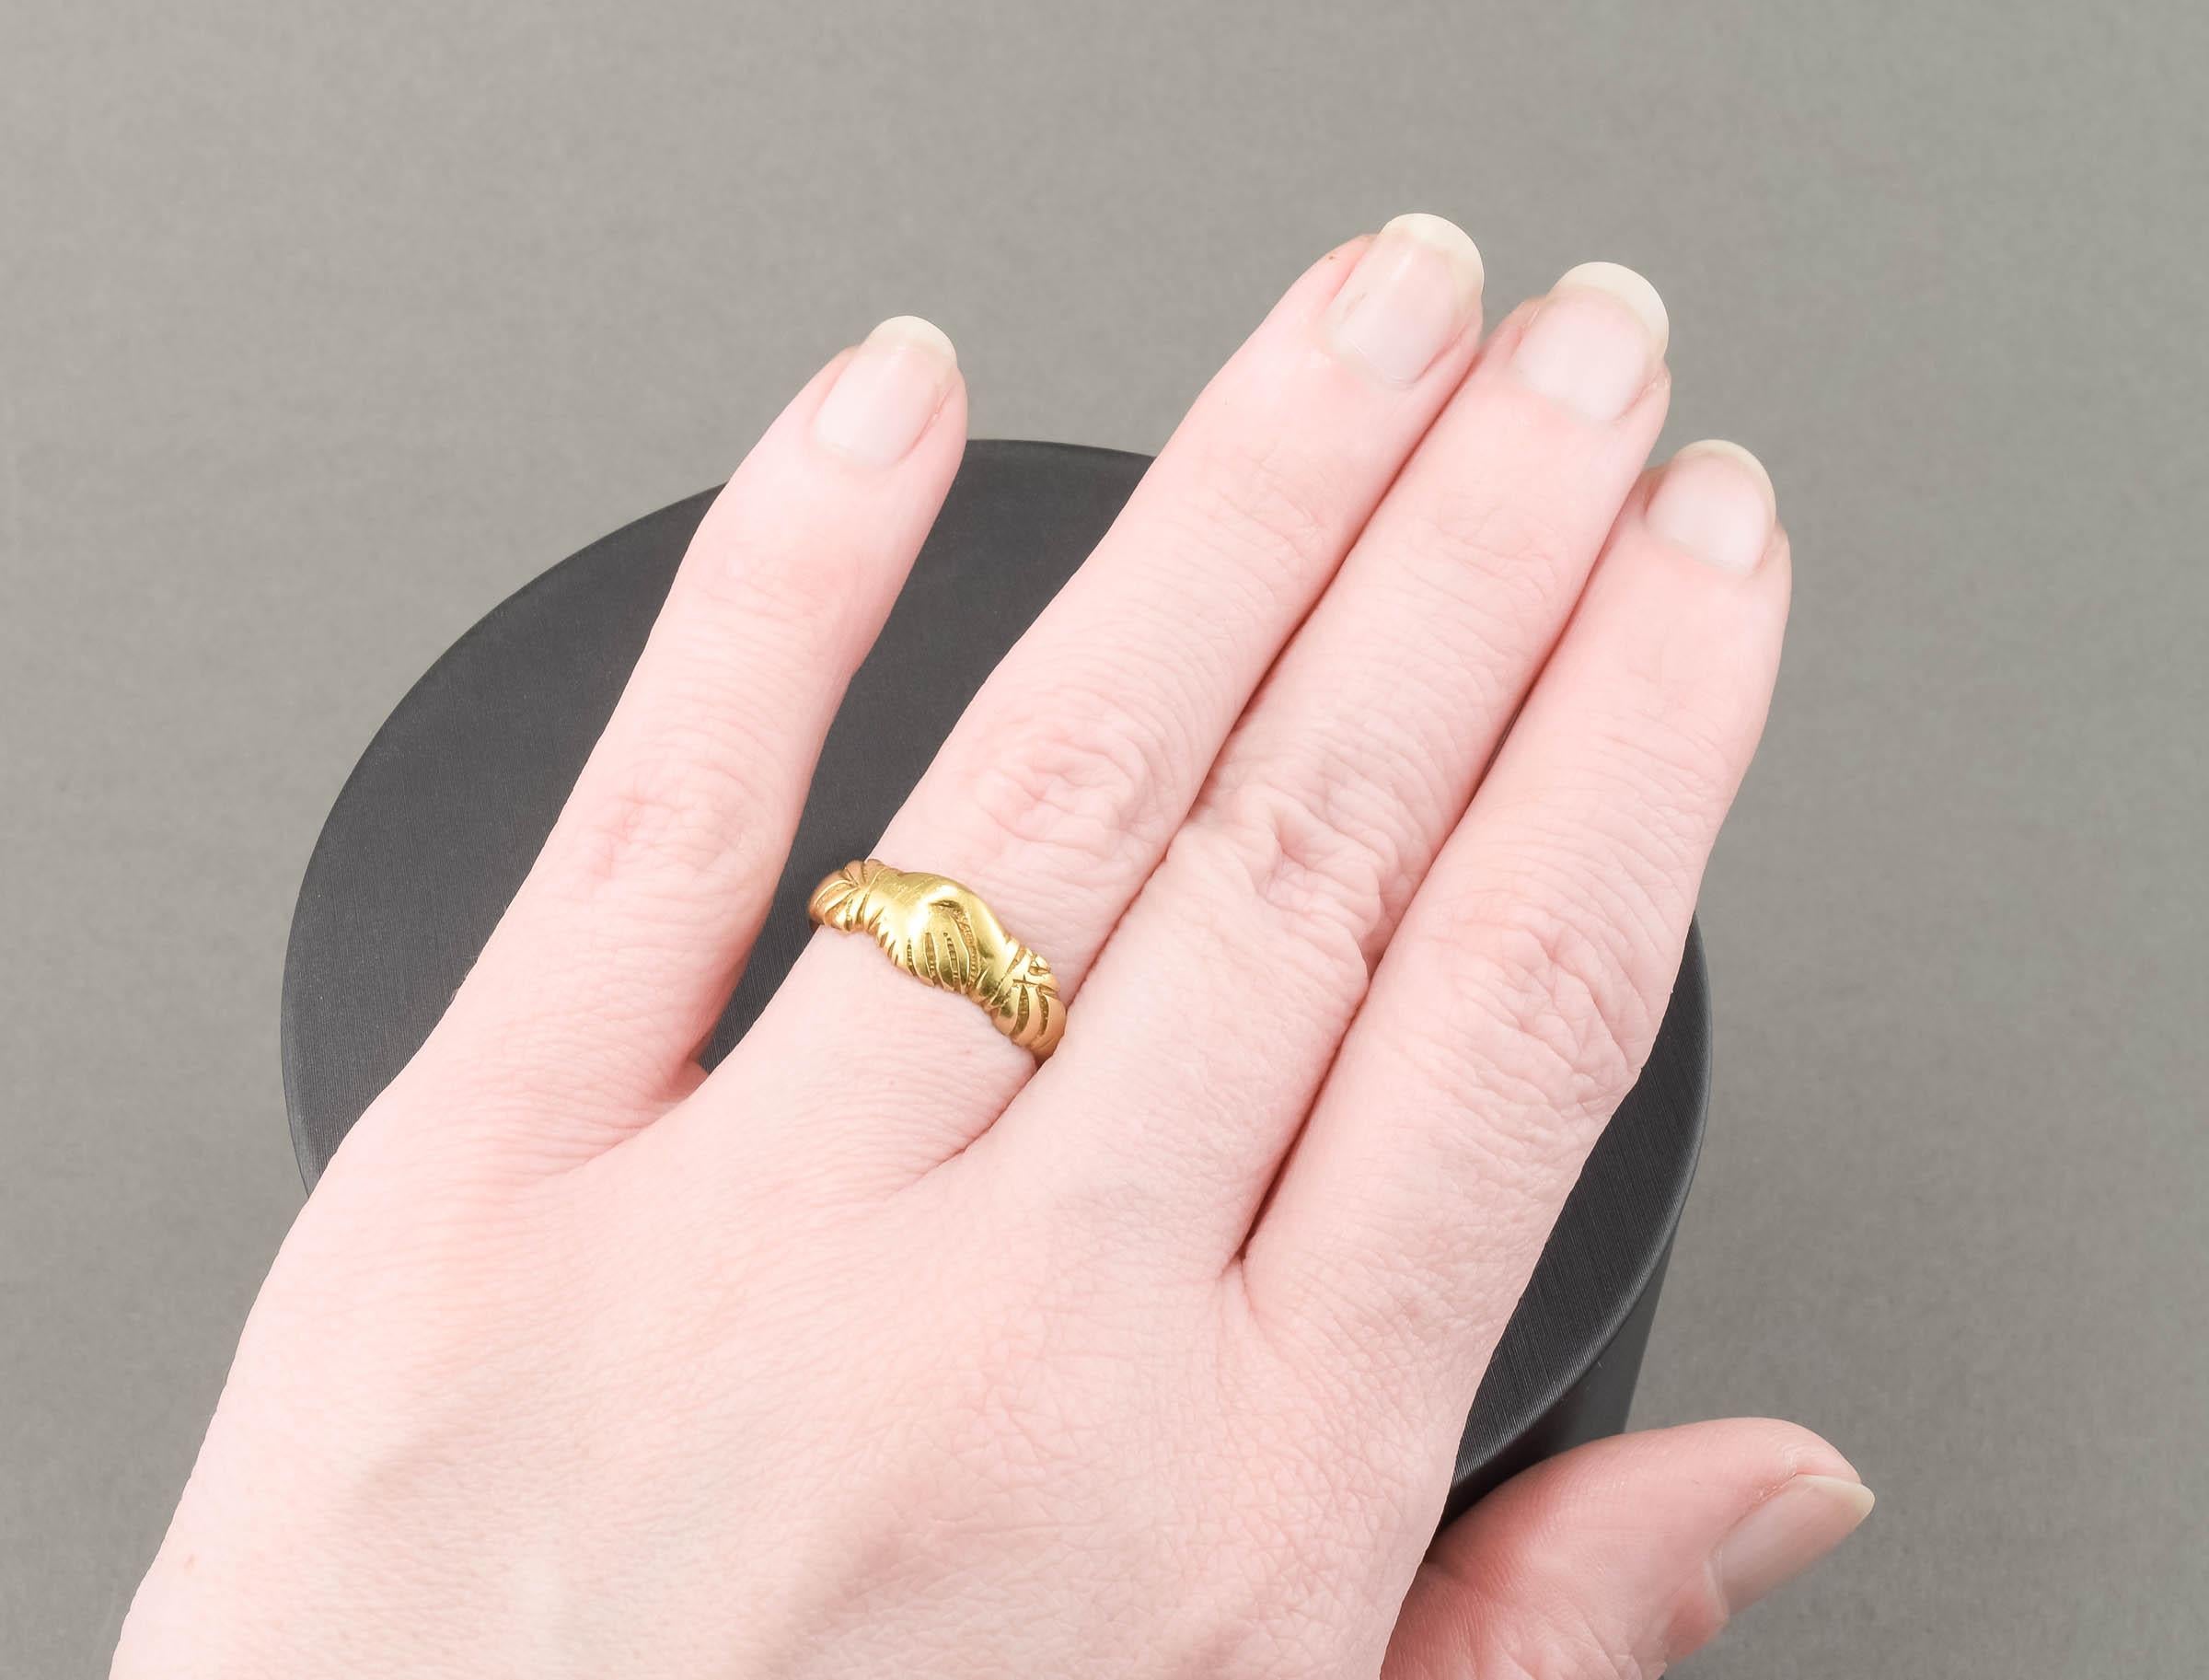 Crafted of solid 18K buttery gold, the ring features the enduring symbol of love, friendship and partnership - two clasped hands. (Fede rings go back to the 3rd and 4th century and became especially popular during the Middle Ages. 